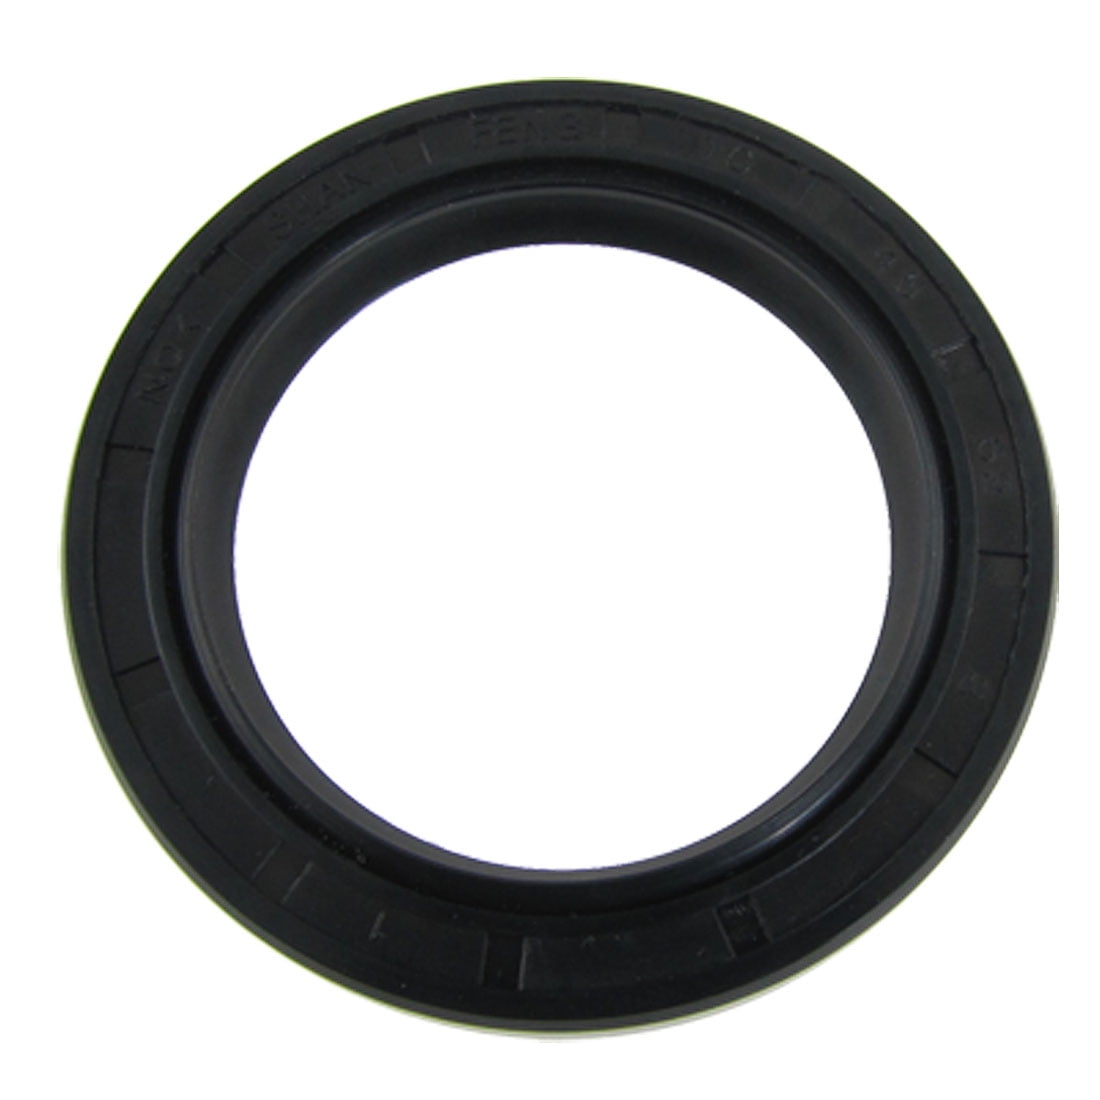 Metric Oil Shaft Seal 20 x 40 x 8mm Double Lip  Price for 1 pc 